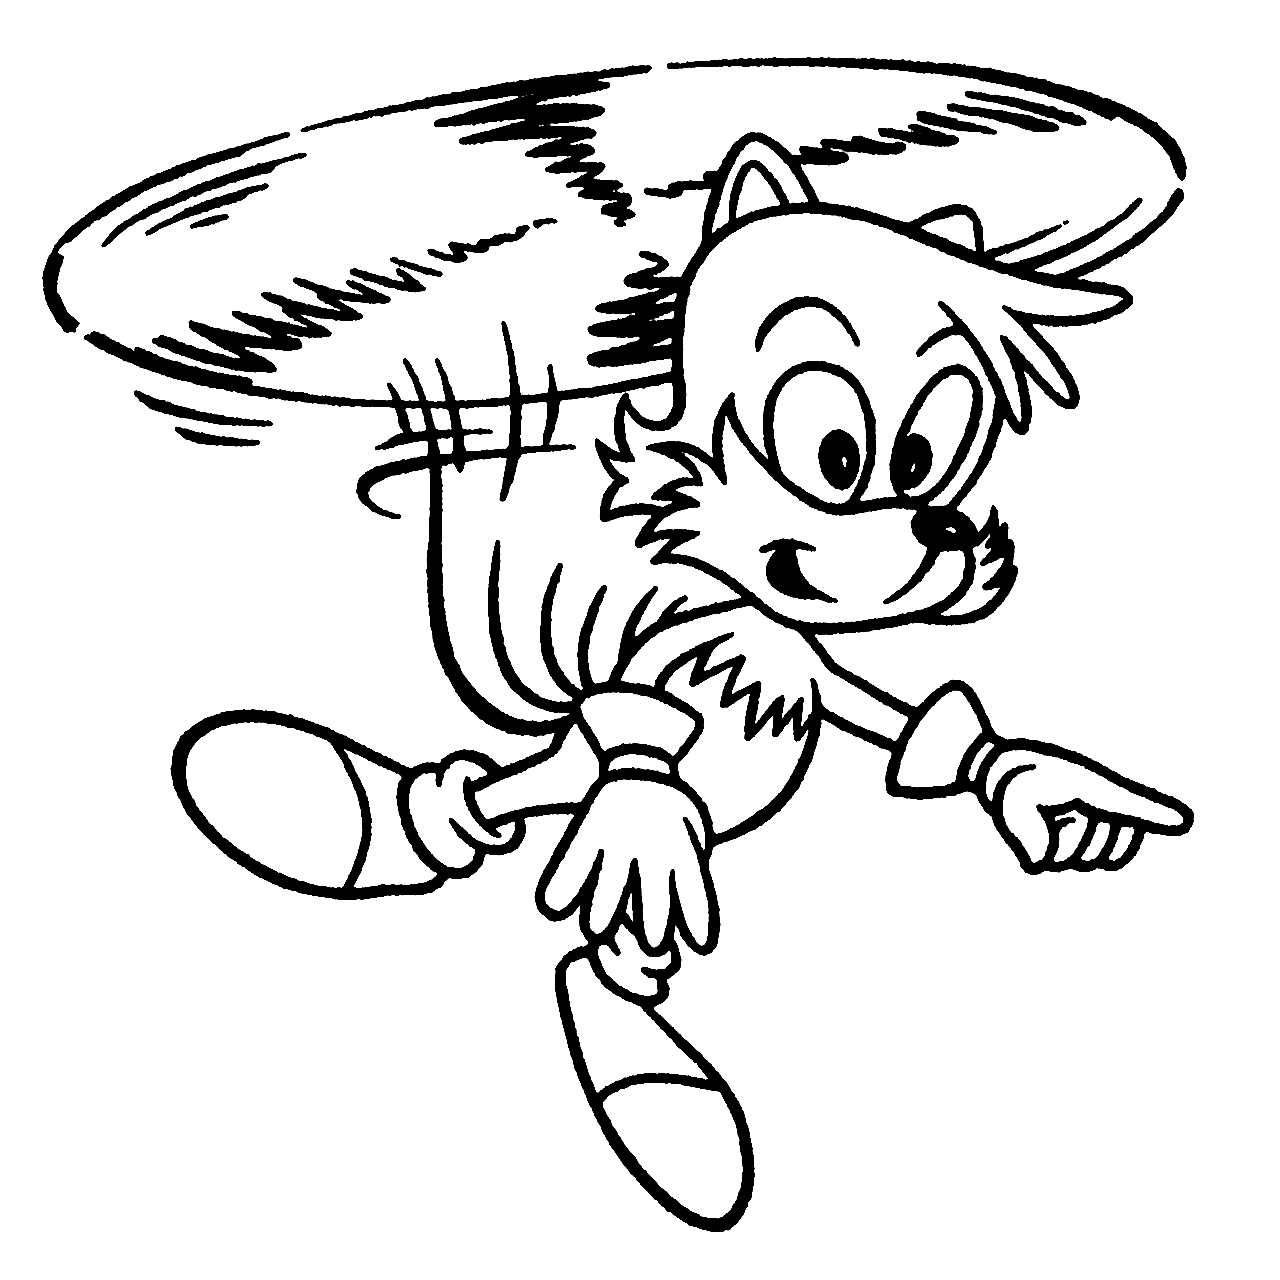 M Sonic Tails Flying Coloring Pages Coloring Pages